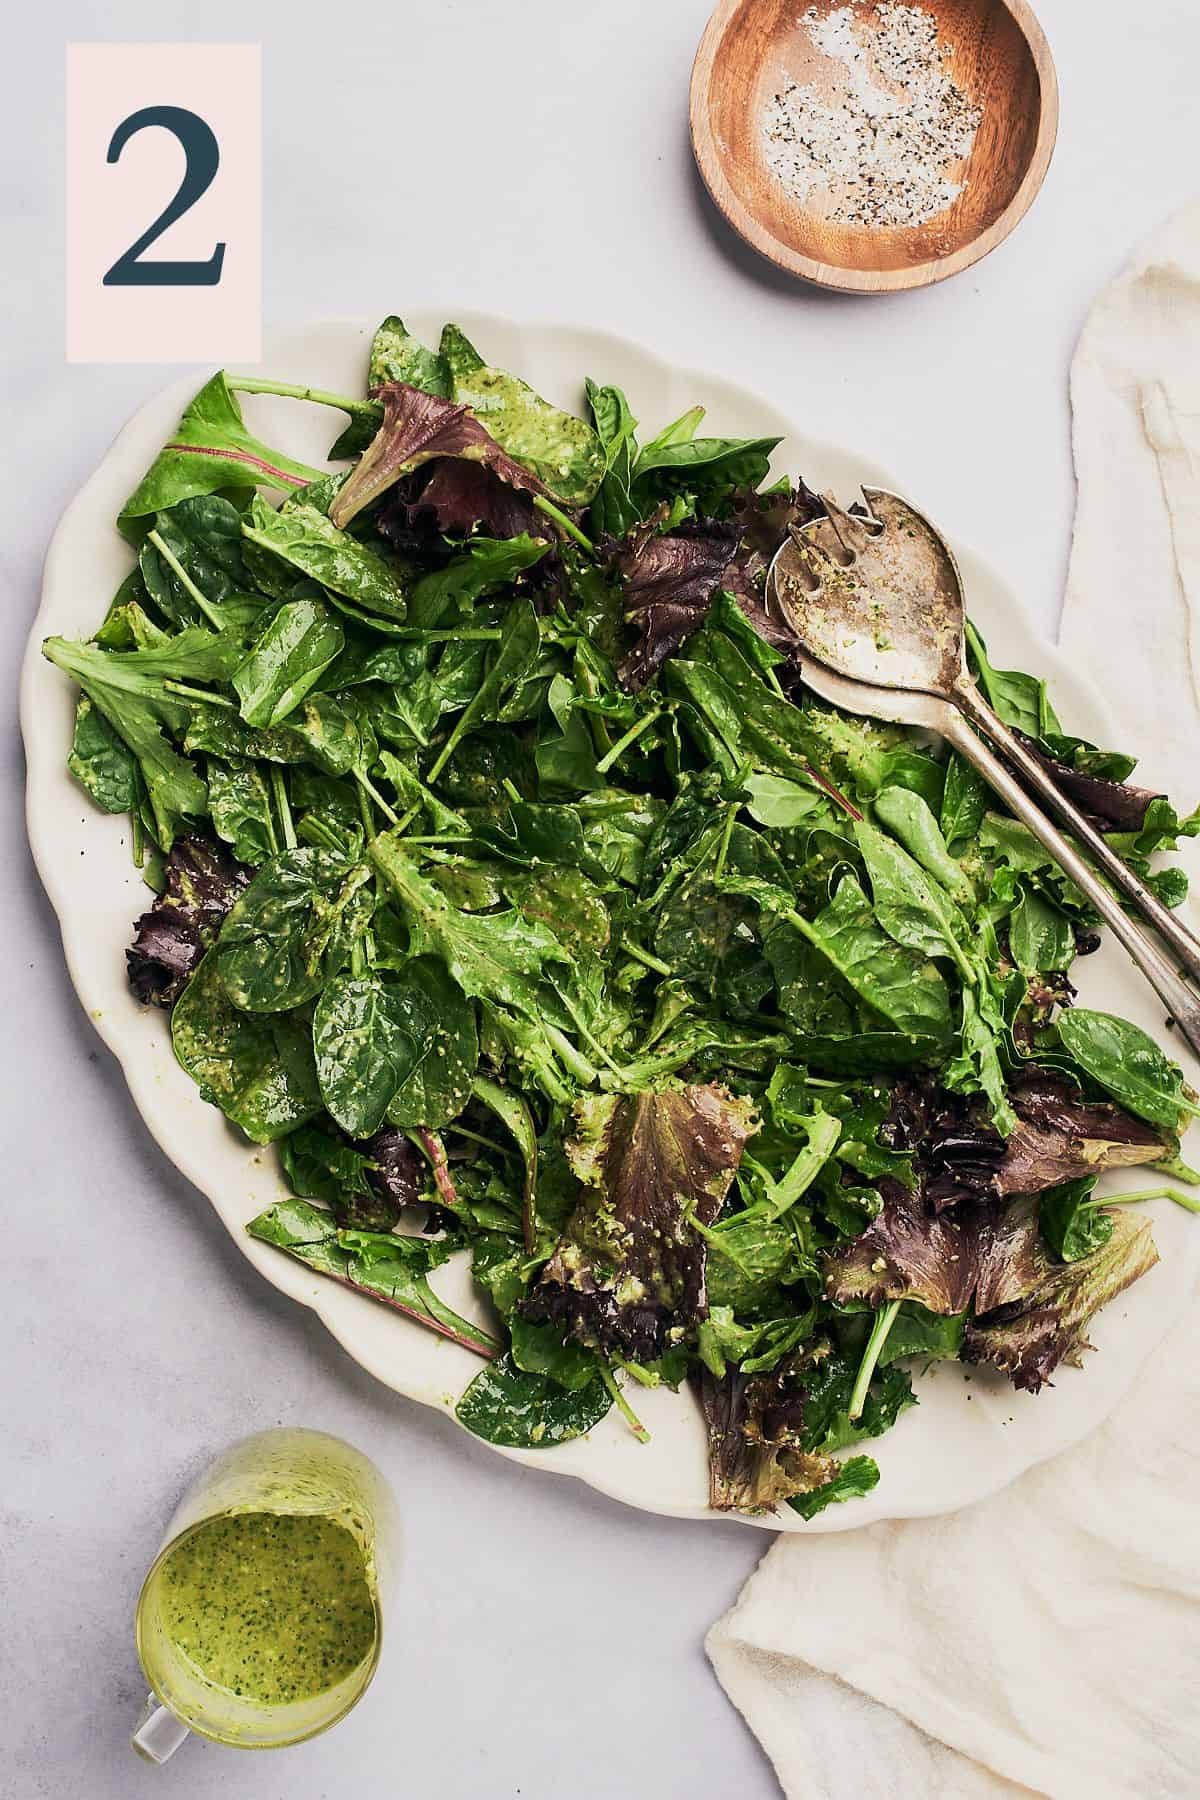 leafy greens dressed with a little salt and pepper on a large serving platter.